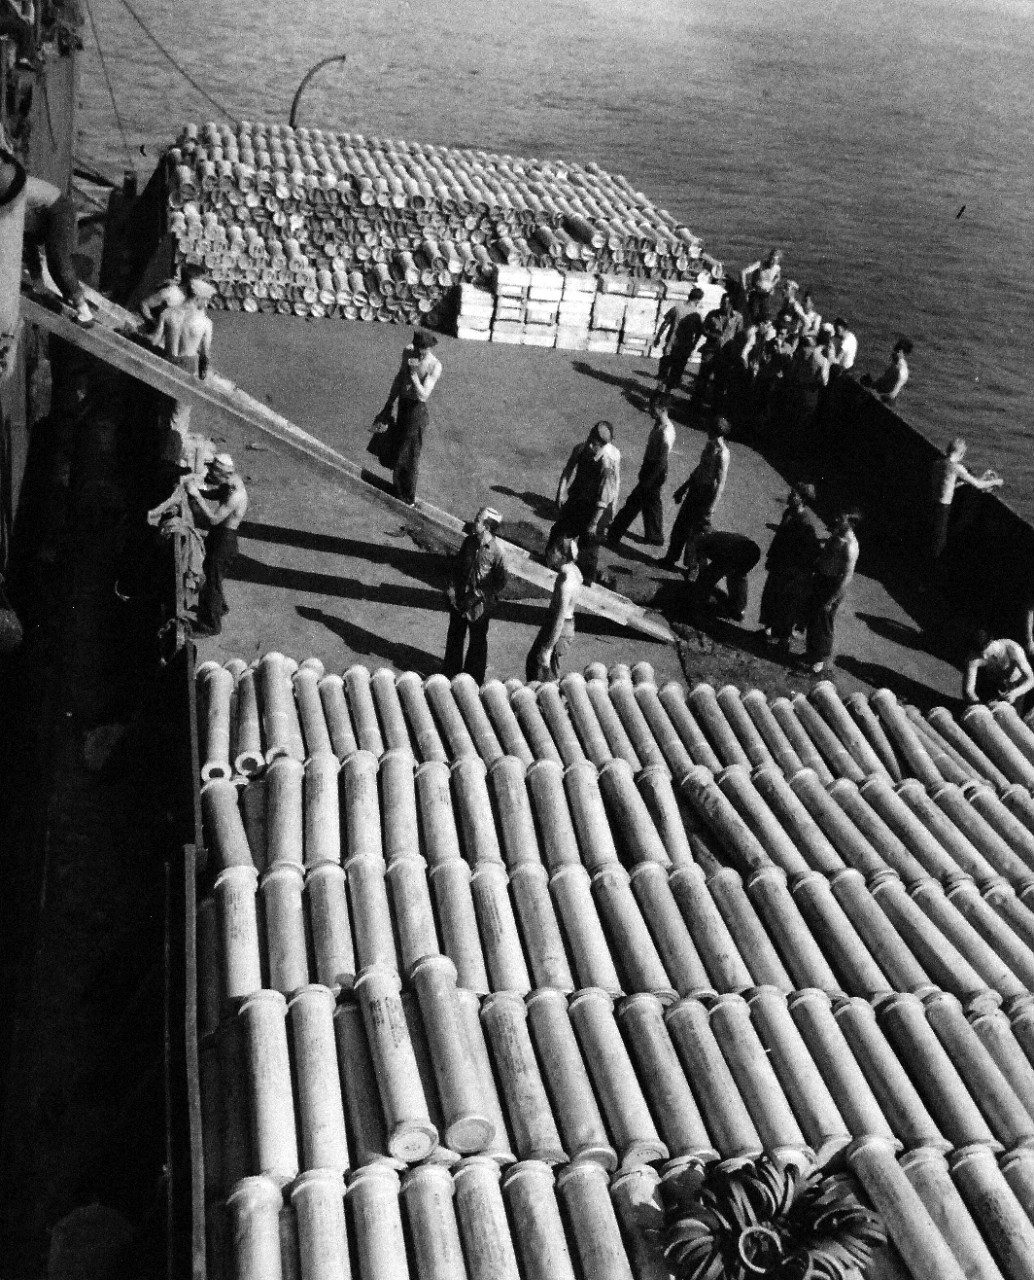 80-G-54565:  Battle of Kula Gulf, July 5-6, 1943.    Files of empty shell cases are loaded on a barge from a U.S. Navy warship which used them in the Battle of the Kula Gulf.     Photograph, August 17, 1943.   Official U.S. Navy photograph, now in the collections of the National Archives.   (2016/07/19).